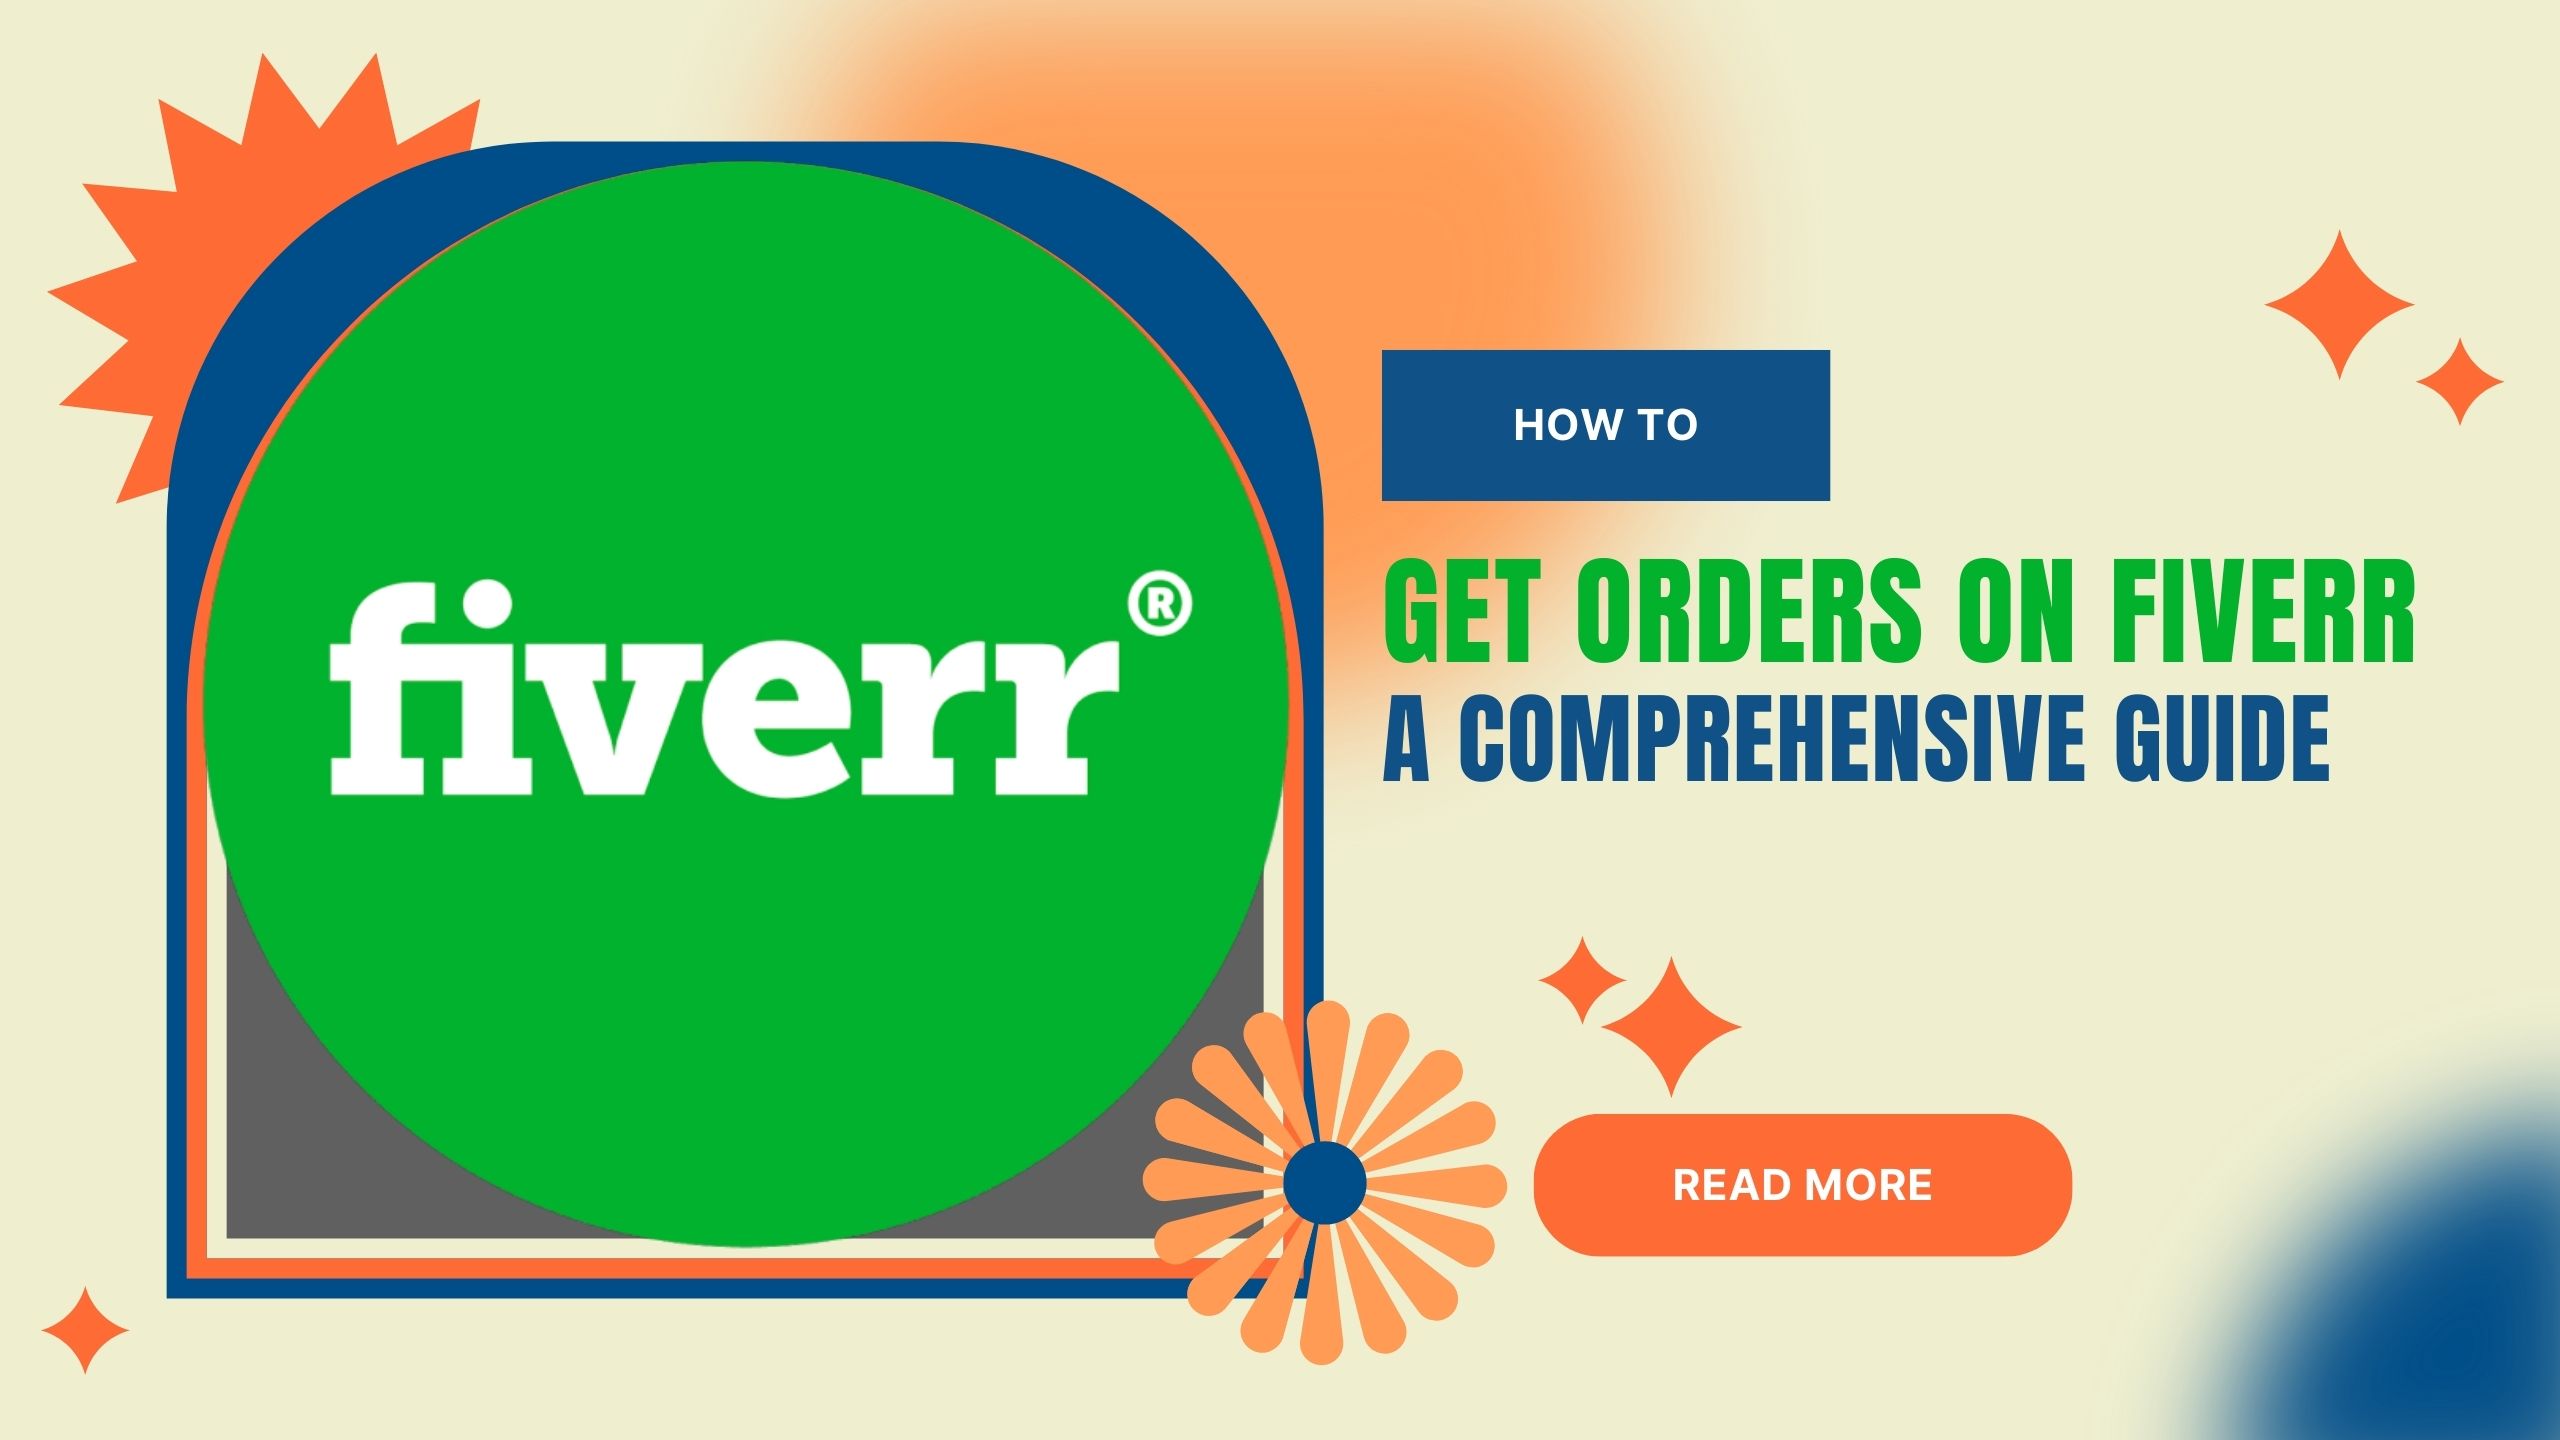 How to Get Orders on Fiverr: A Comprehensive Guide